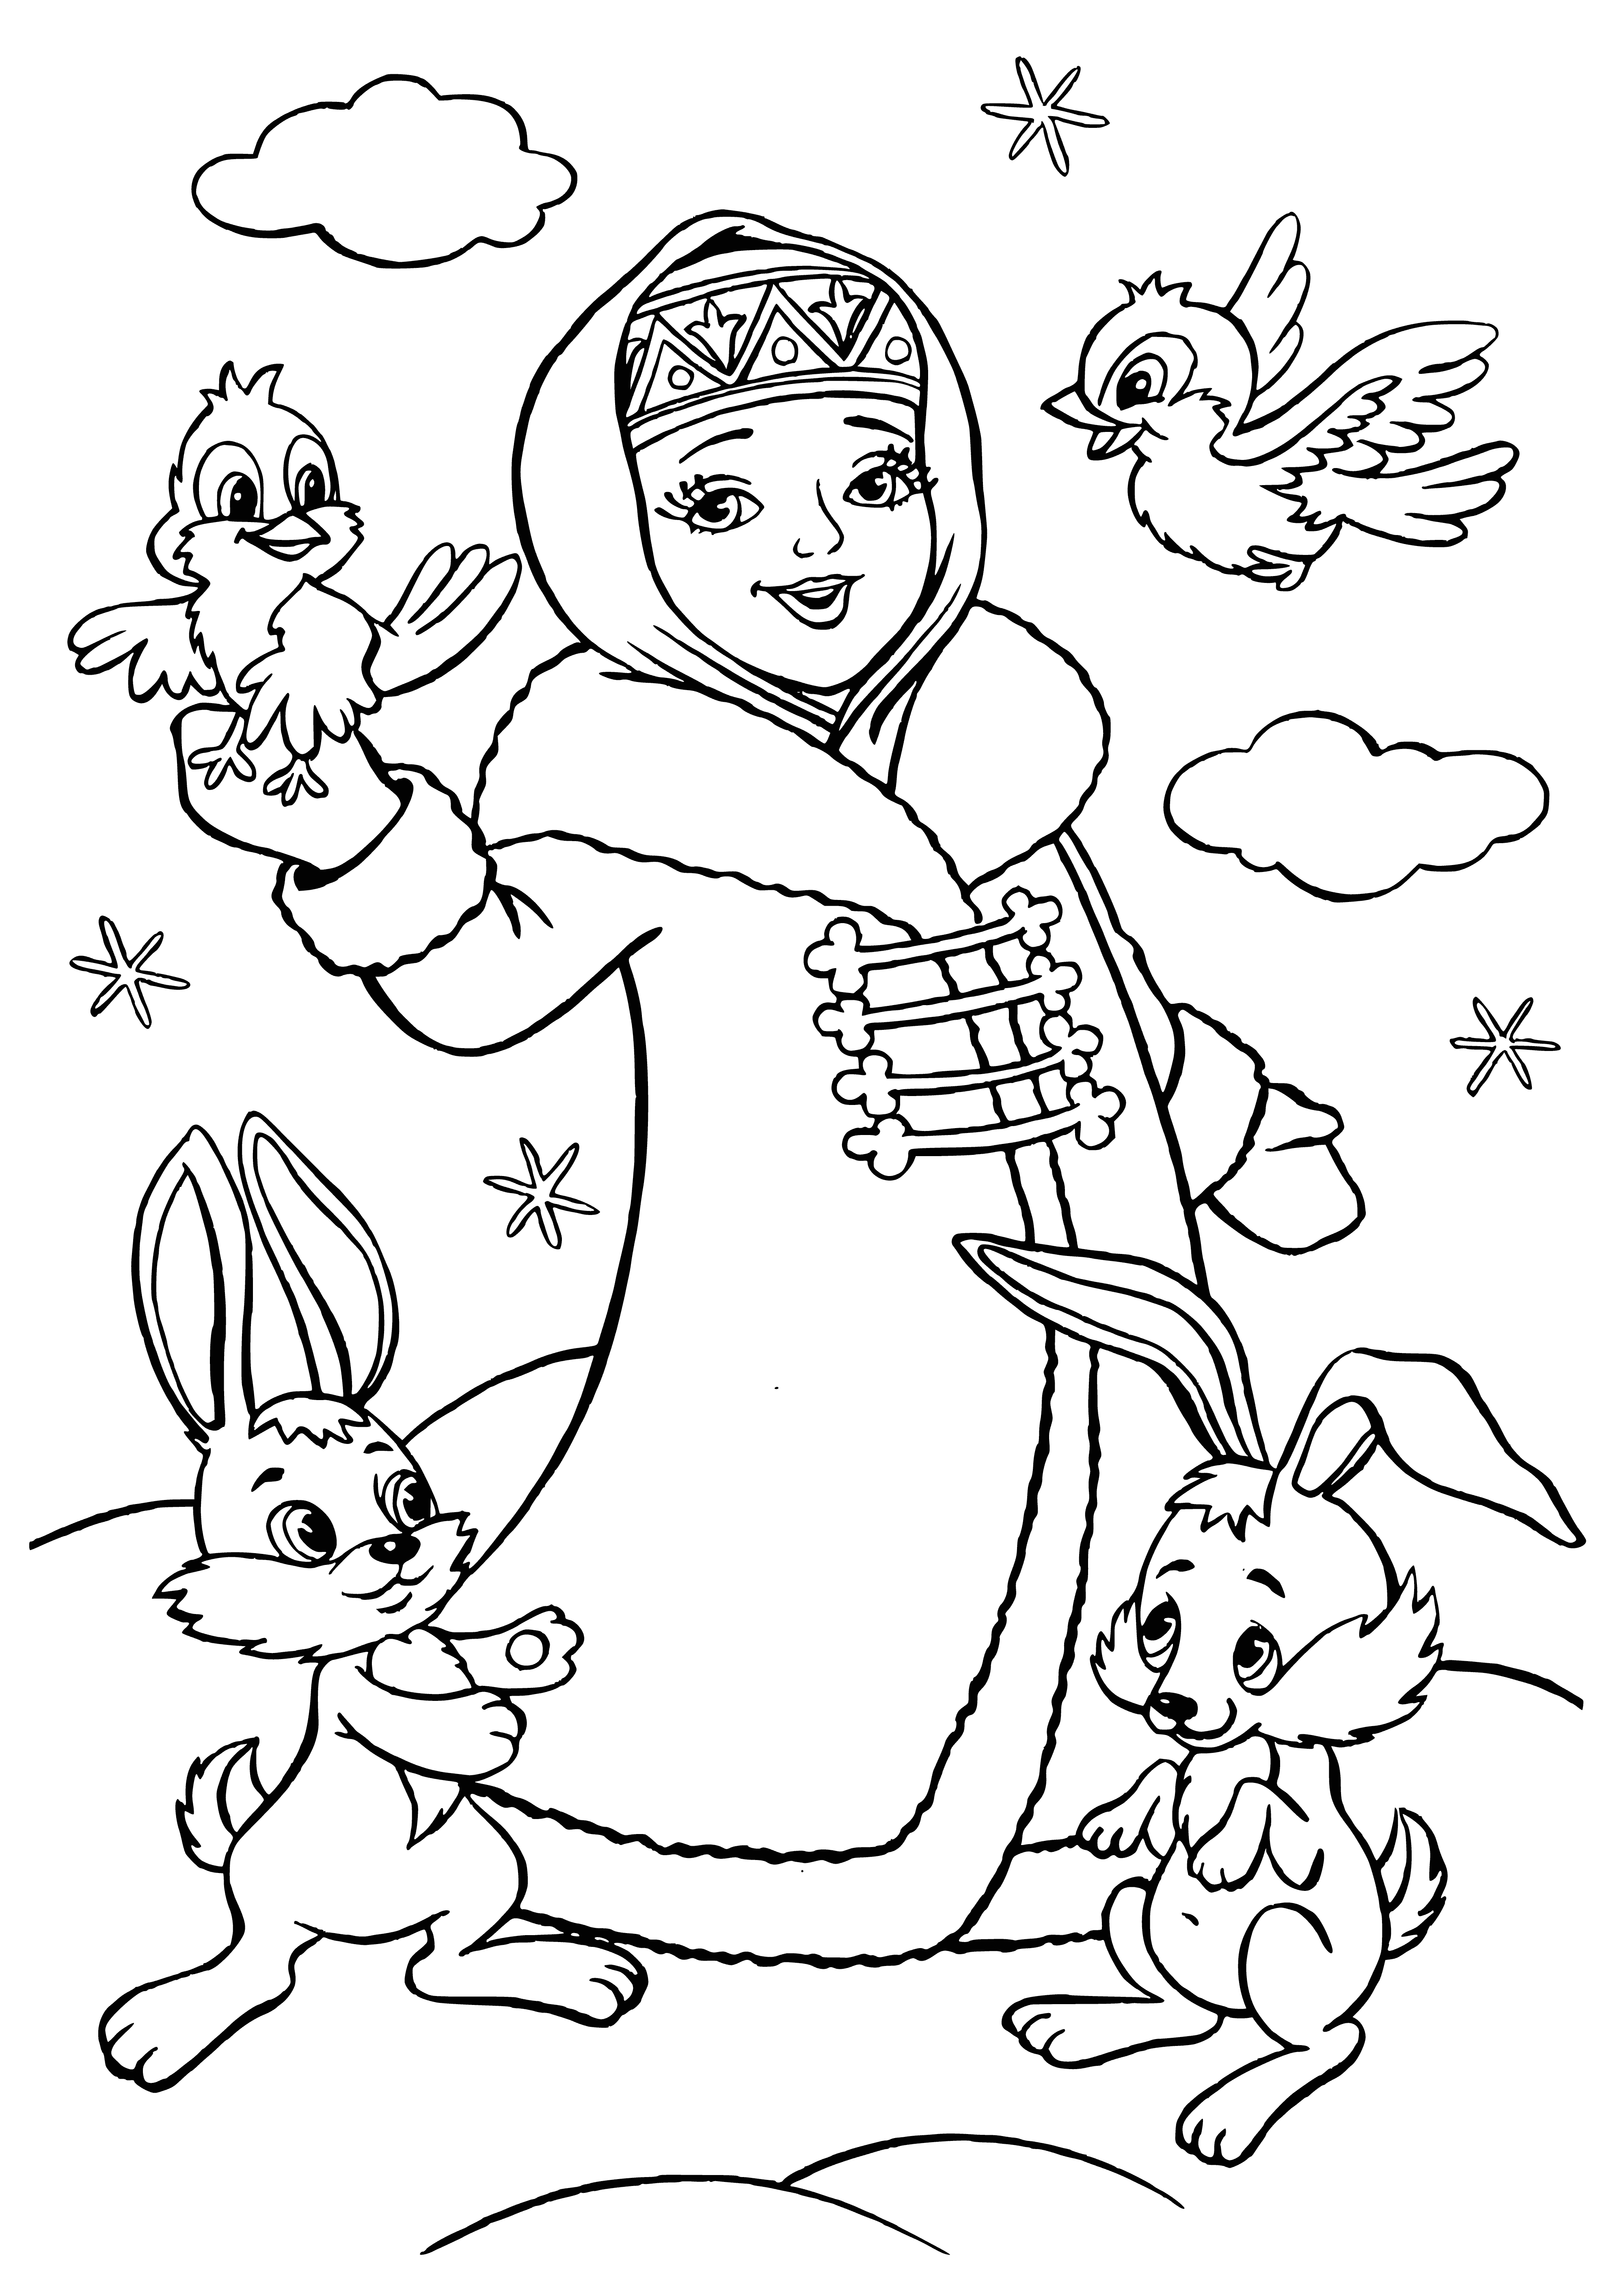 Snow Maiden in center of coloring page, 2 hares beside her. White dress, long white hair, snowflakes falling.